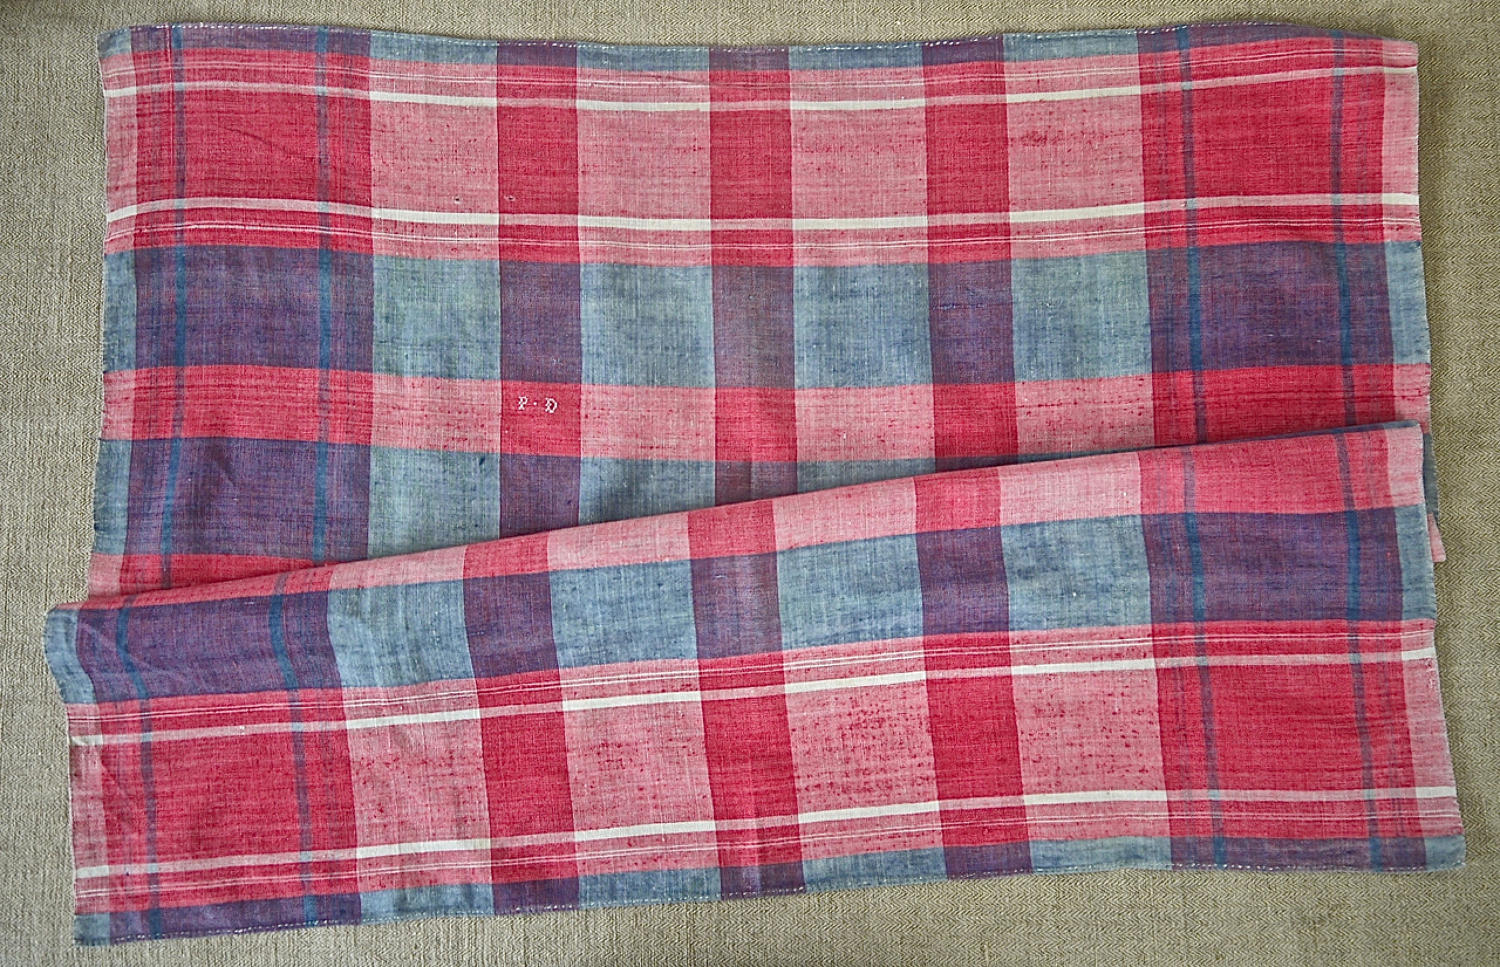 19th century French Faded Indigo and Red Mouchoir